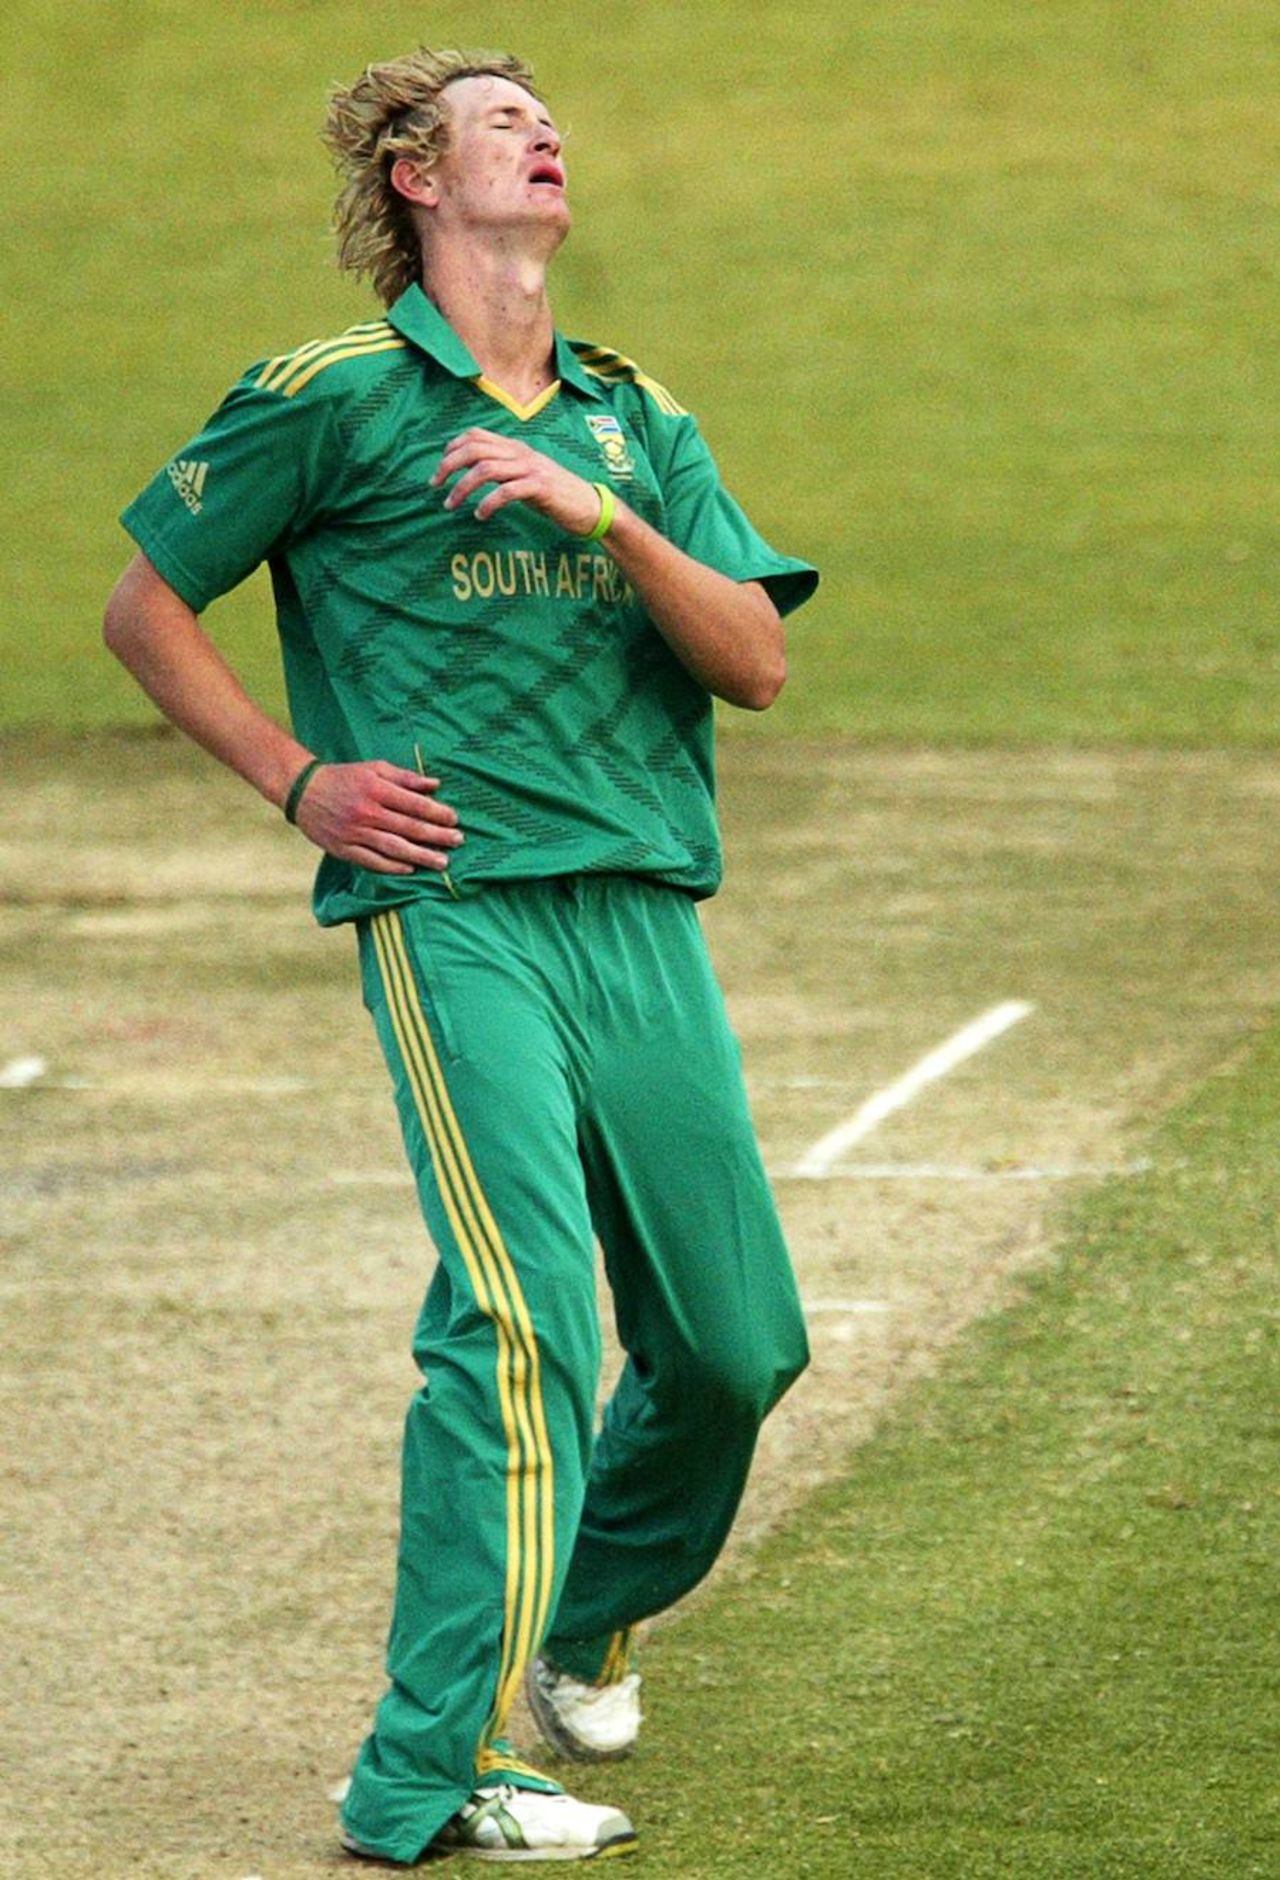 Chris Morris finished with 2.5-0-23-1 in his first game, Bangladesh v South Africa, T20 tri-series, Harare, June 22, 2012